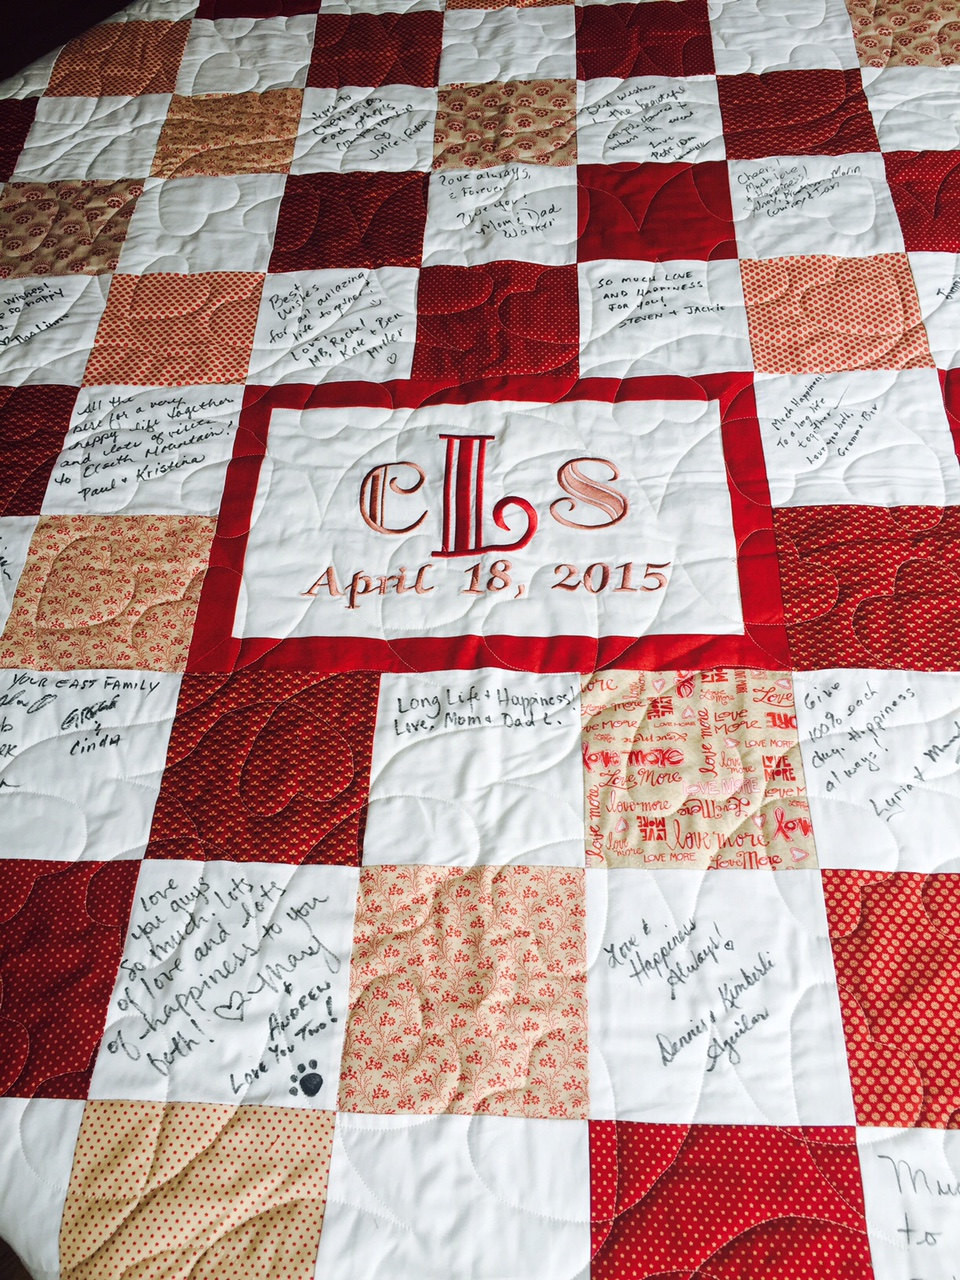 Wedding Quilt Guest Book
 Custom Made Wedding Guest Book Quilt for your guests to sign